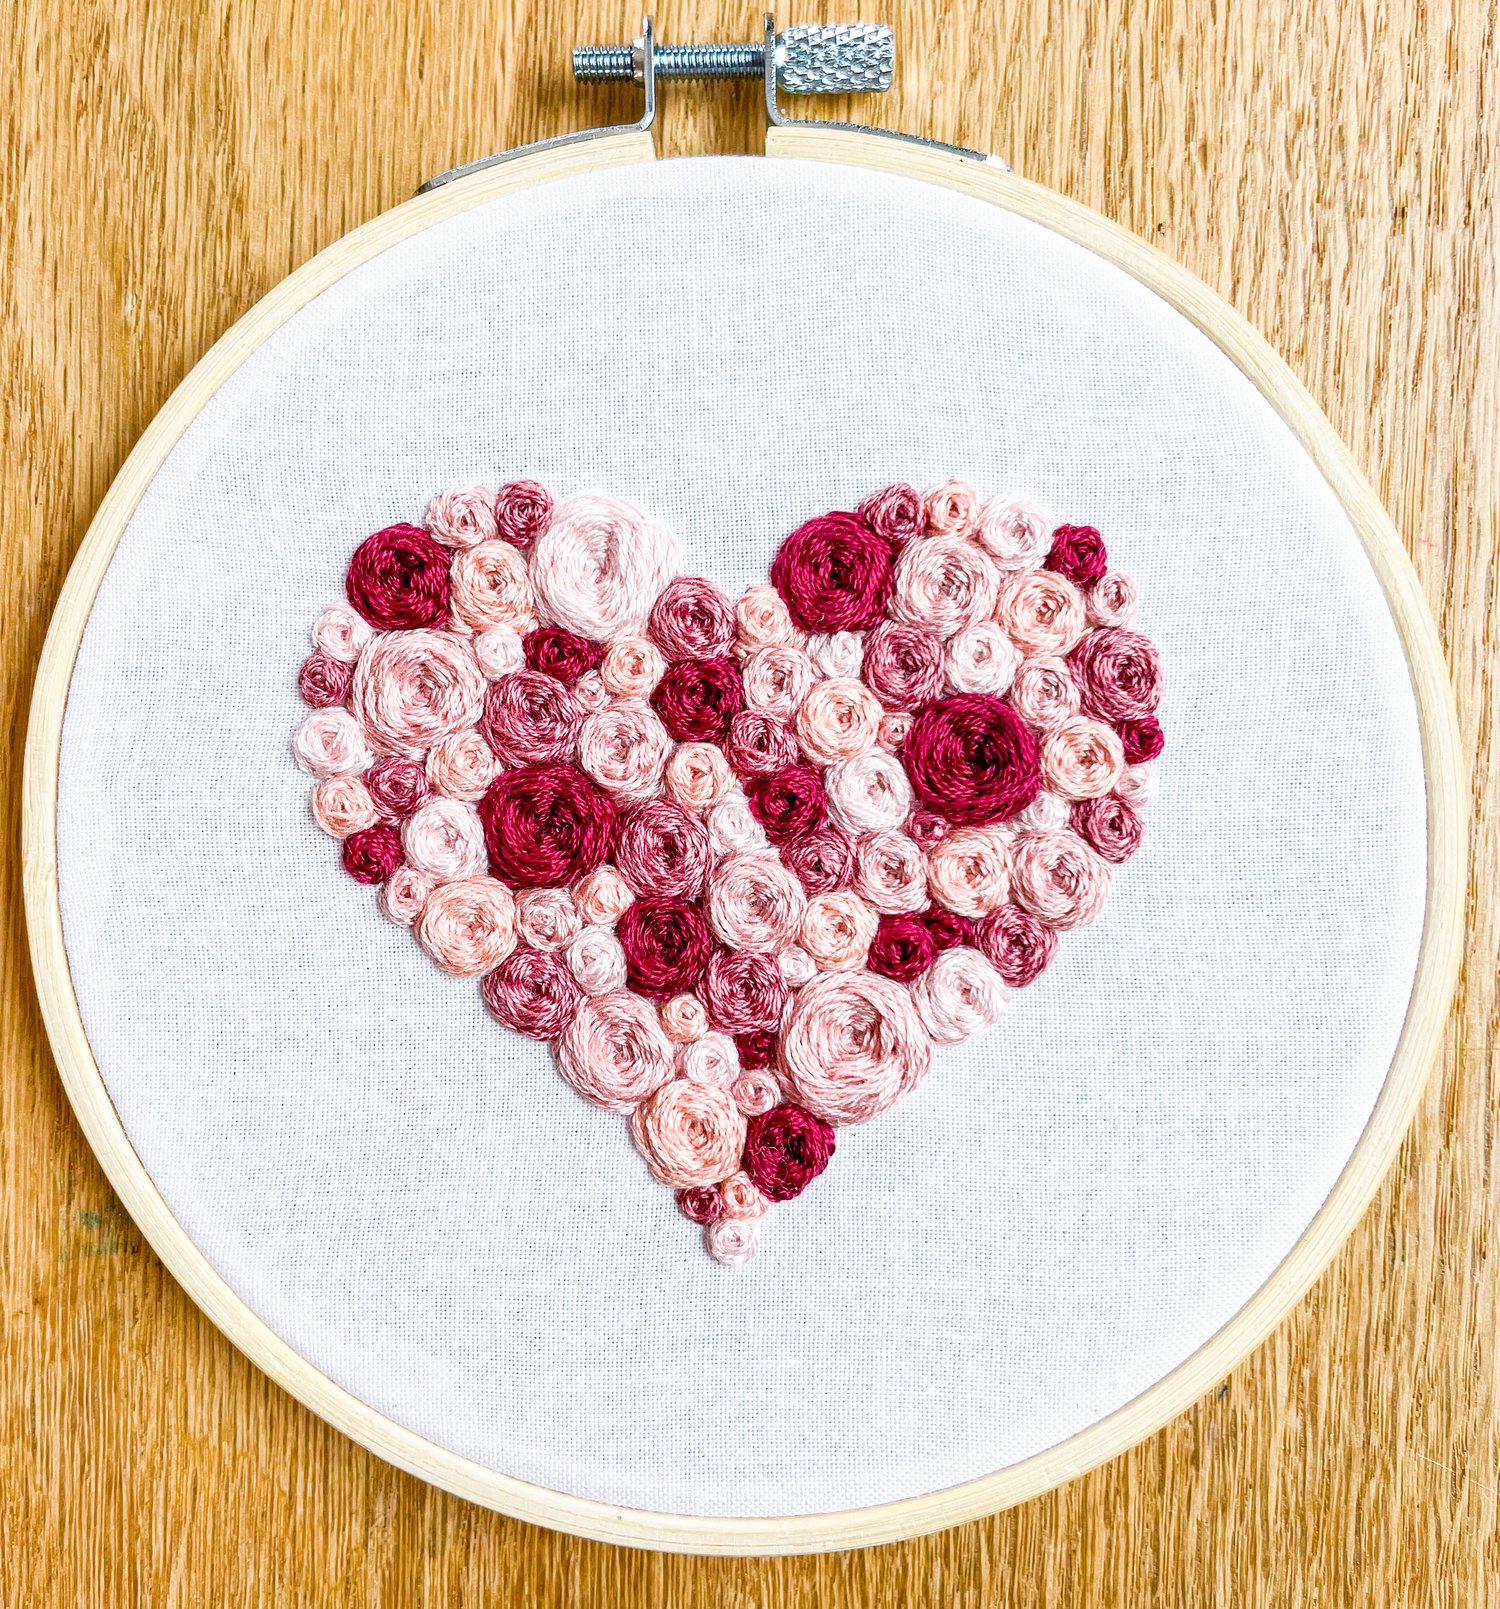 Embroidery Kit for Beginners with Pink Floral Design - Learn to Embroider —  Sherwood Forest Creations